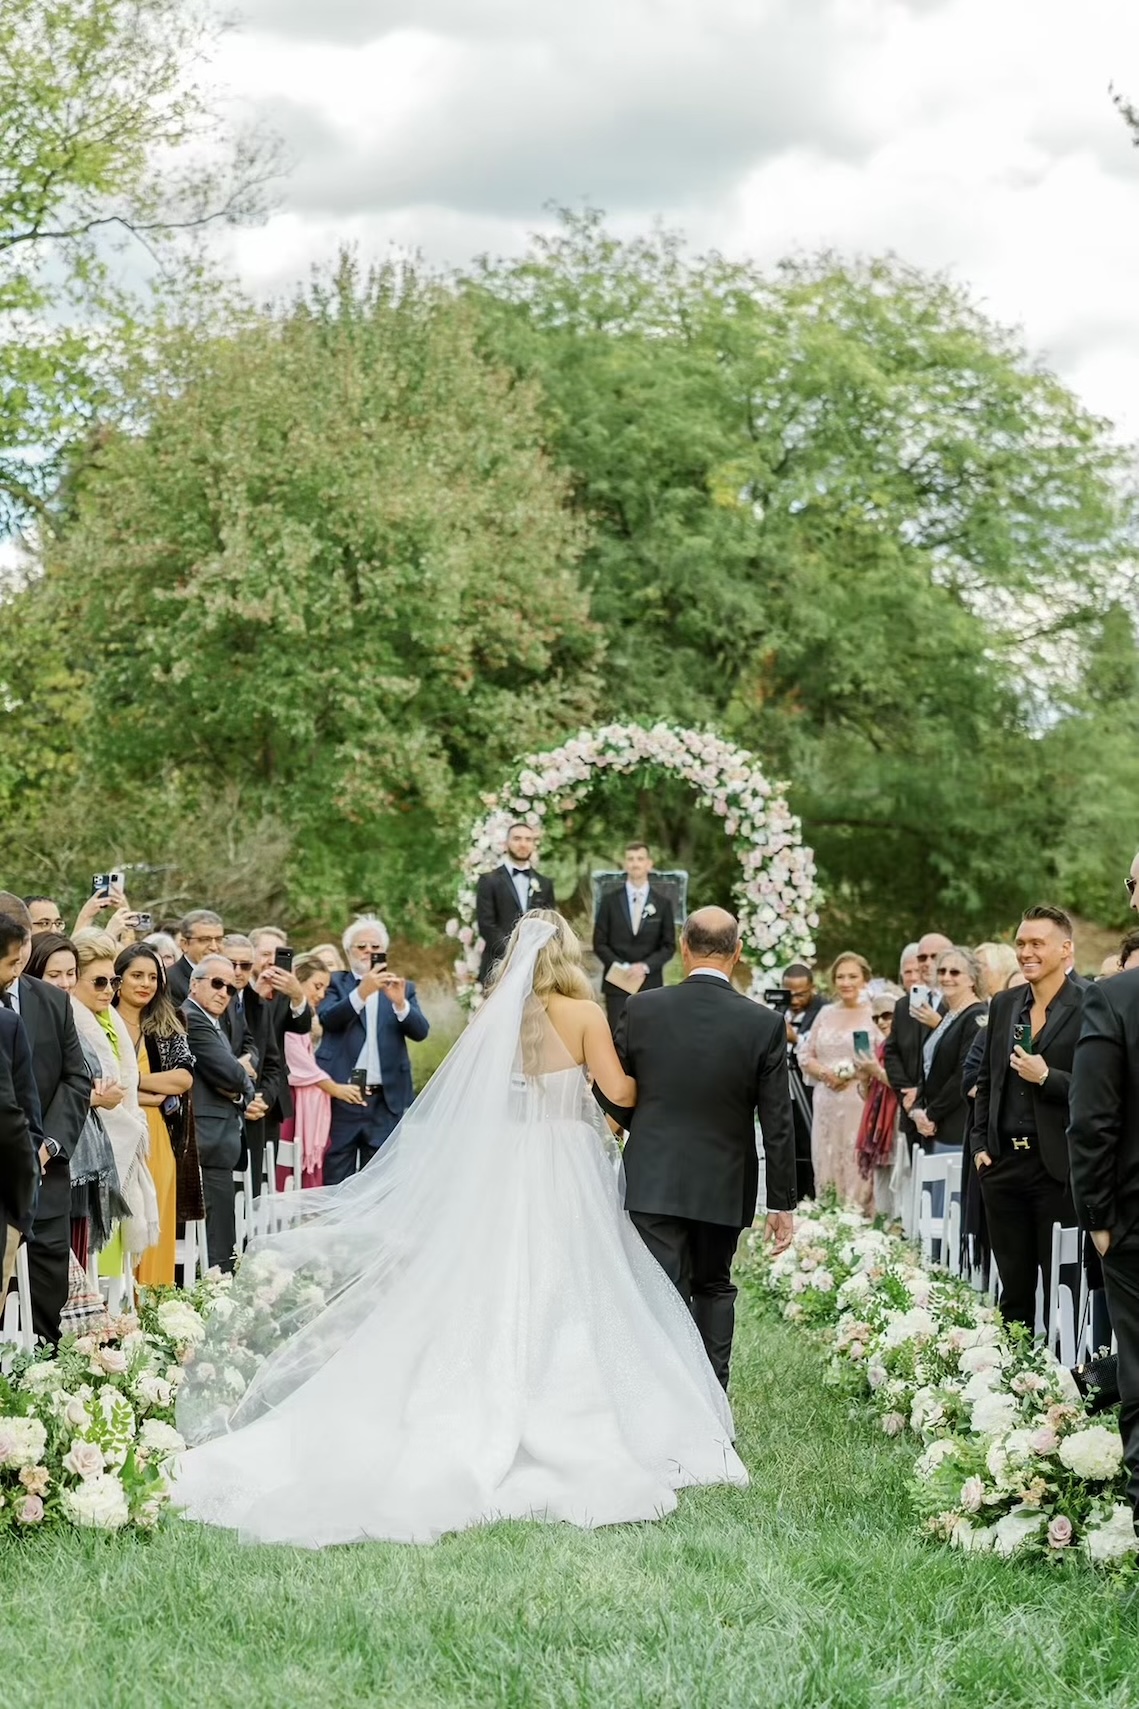 Bride and father walk down the aisle at the outdoor wedding